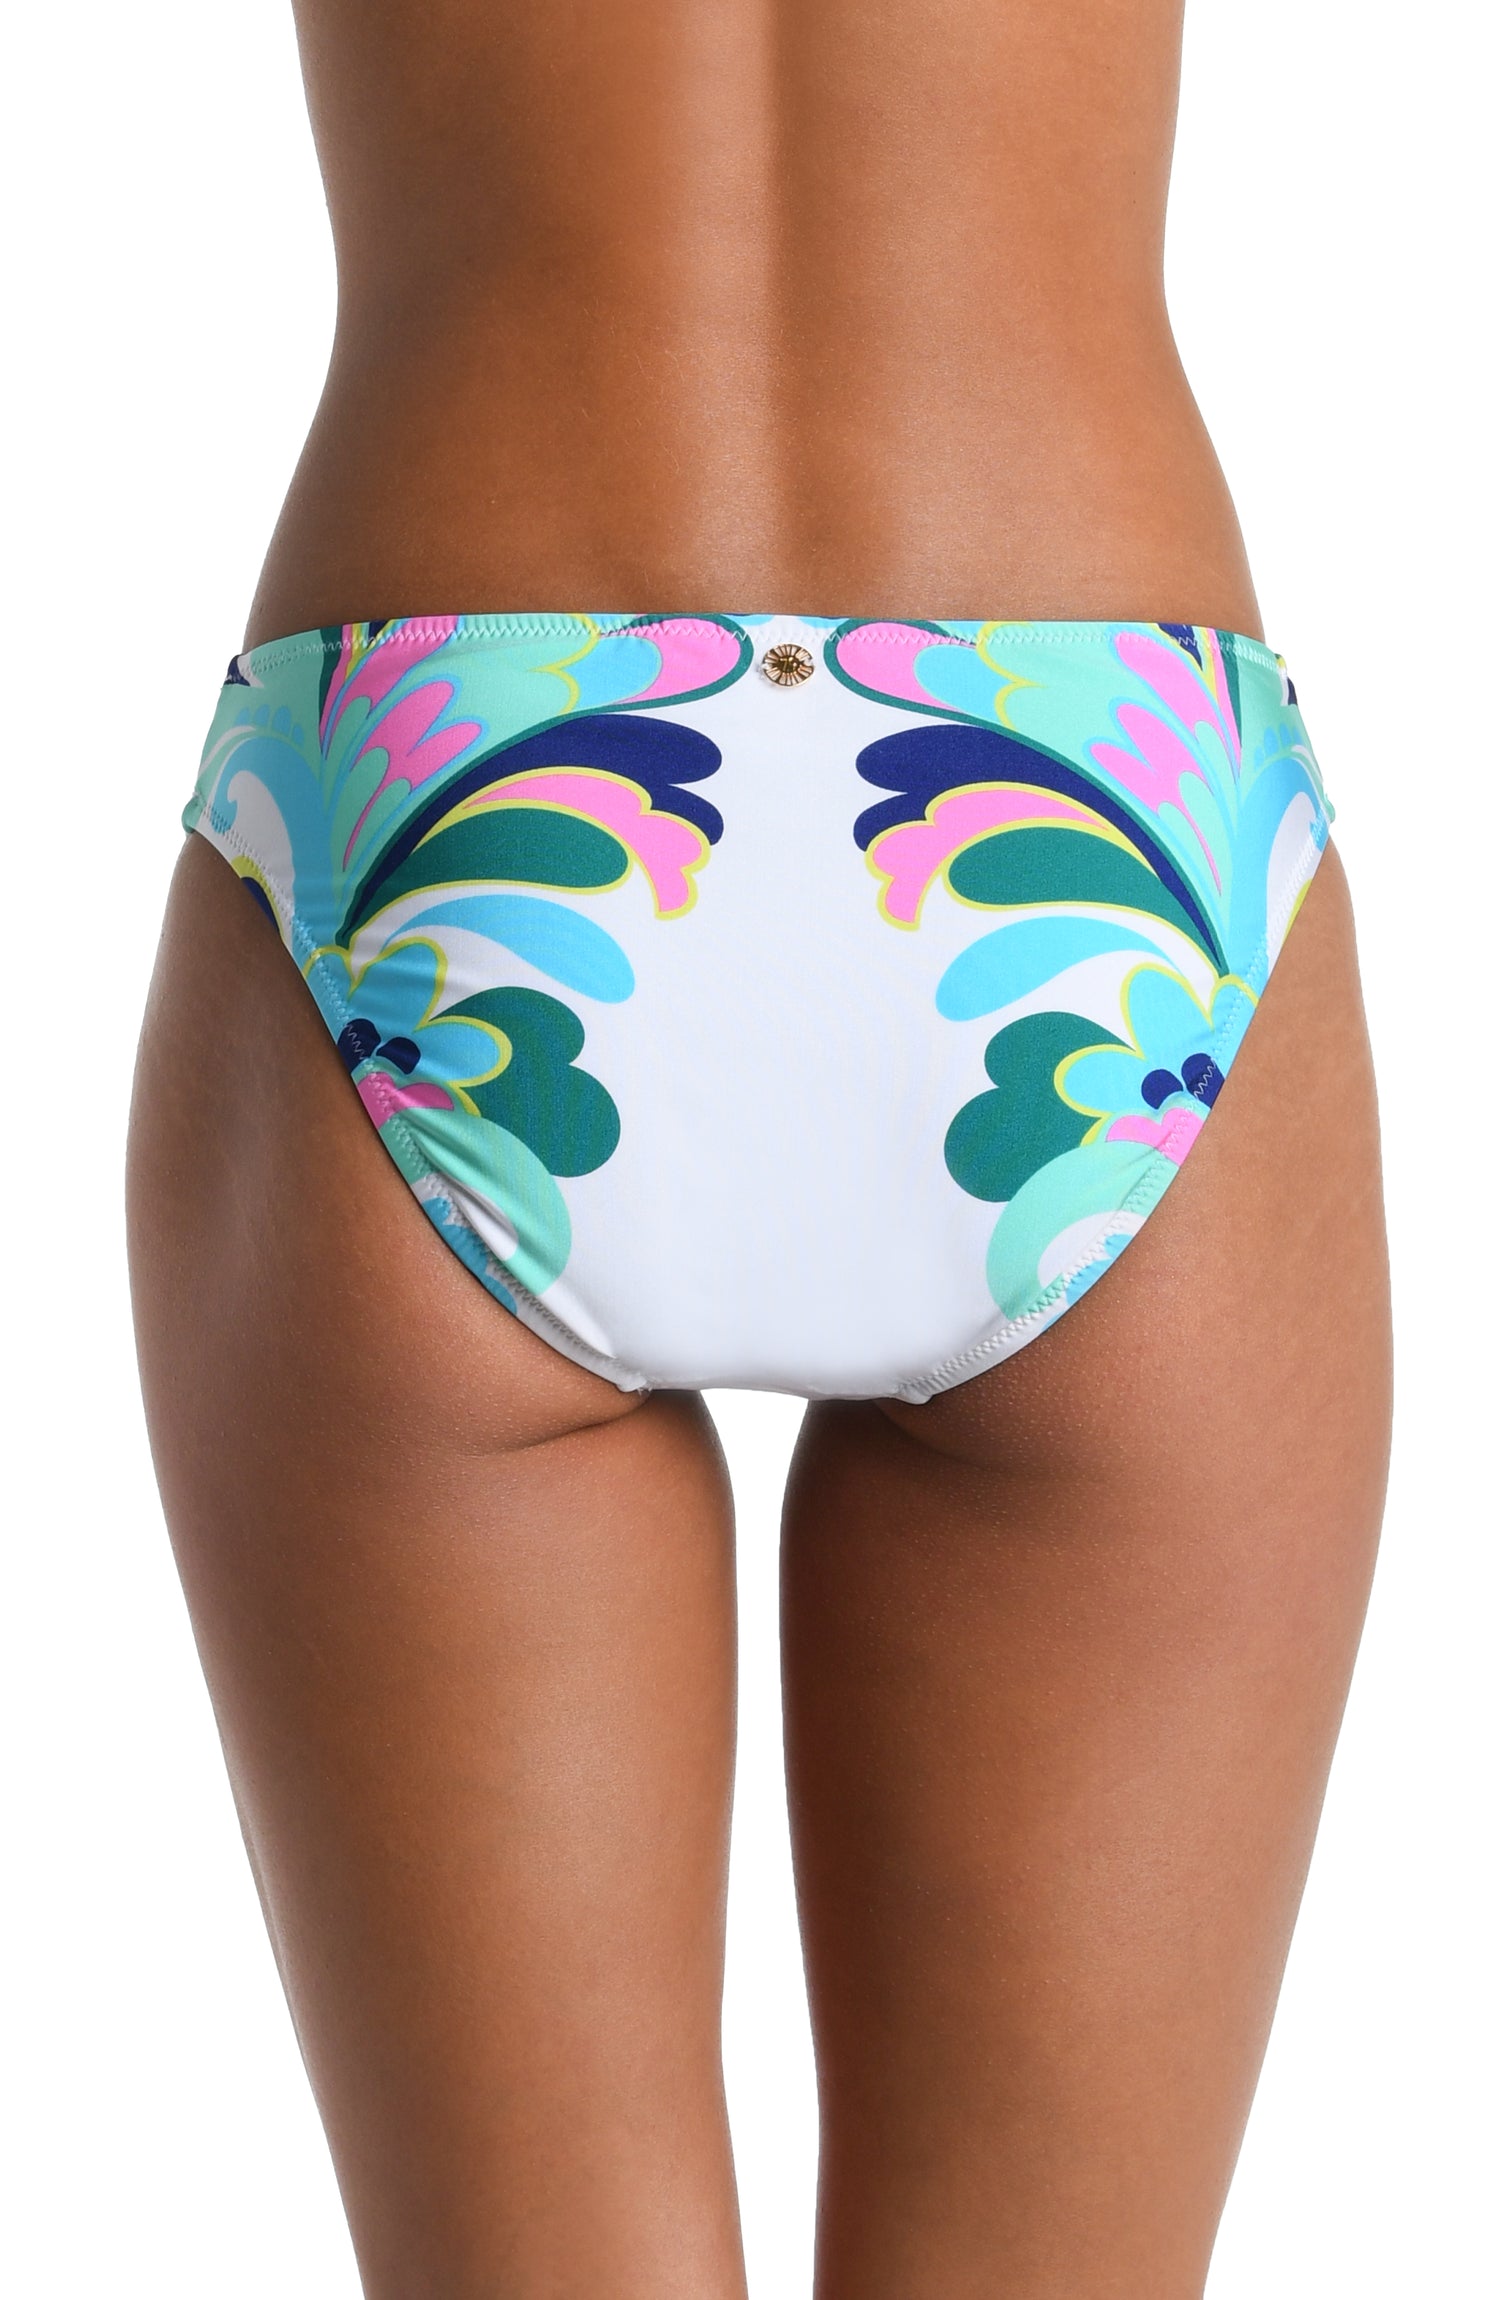 Model is wearing a white, blue, green, and pink multicolored floral printed Hipster Bottom